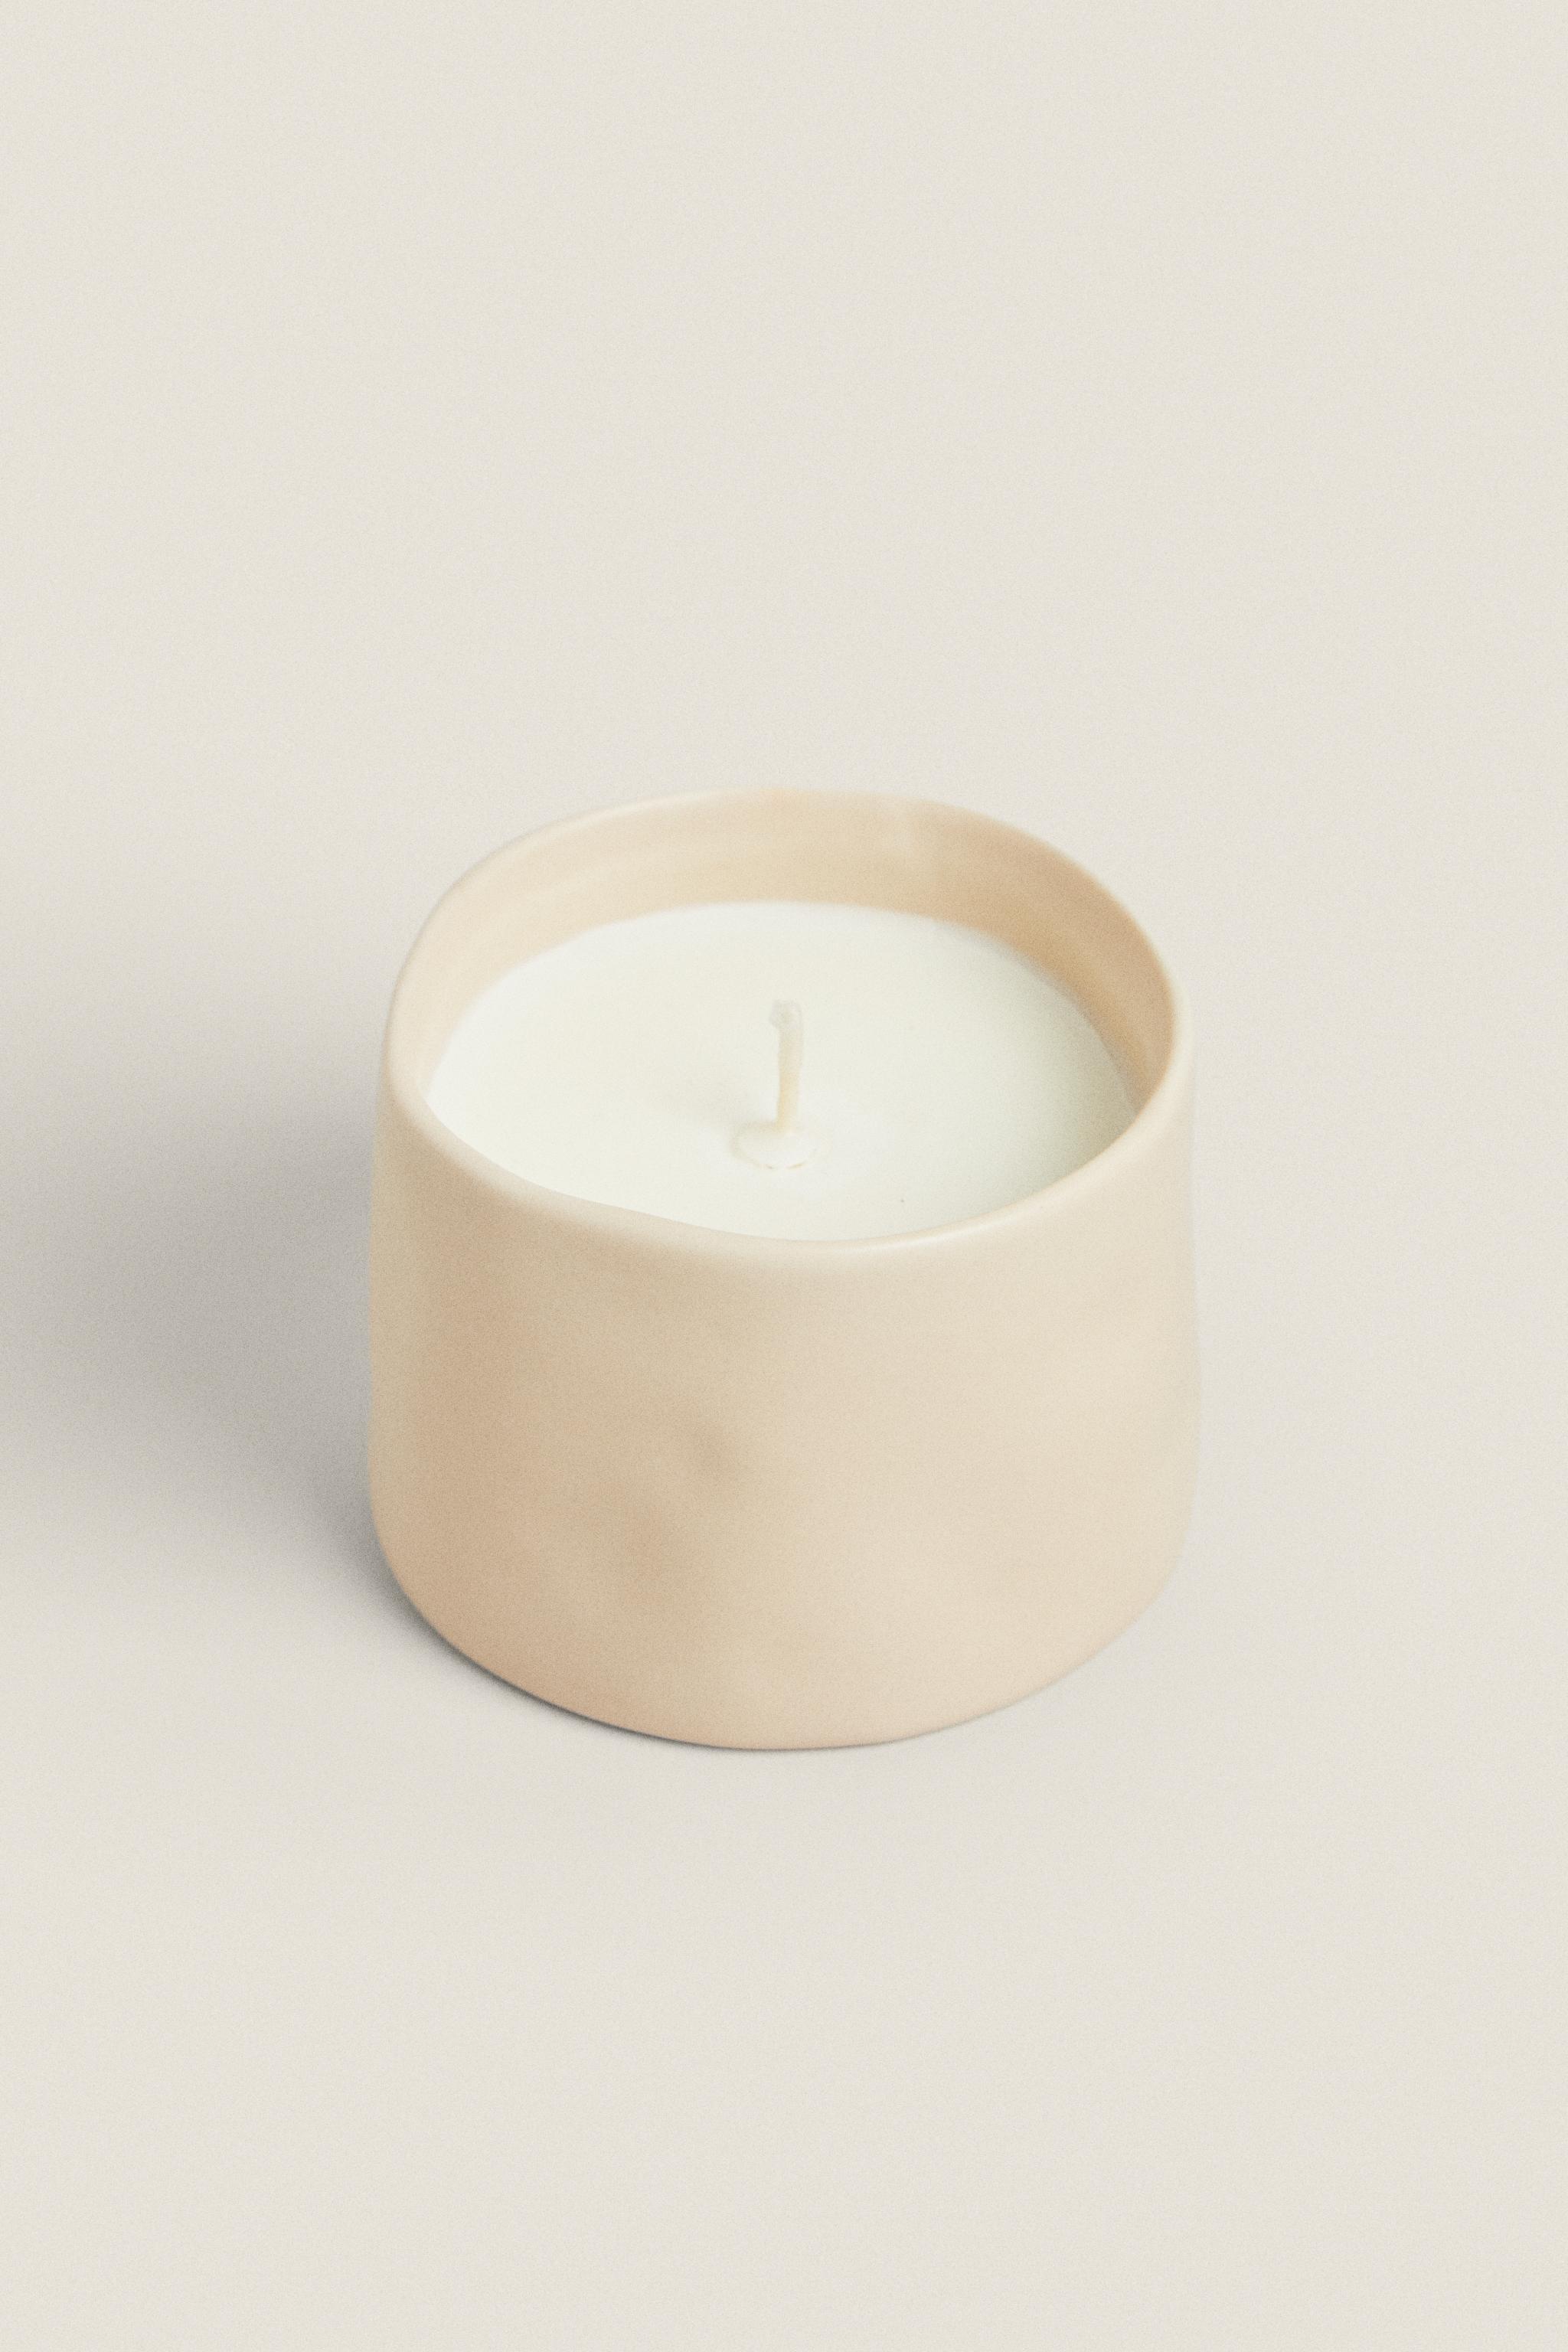 (150 G) FLORAL TONKA SCENTED CANDLE - Black / Yellow - Zara